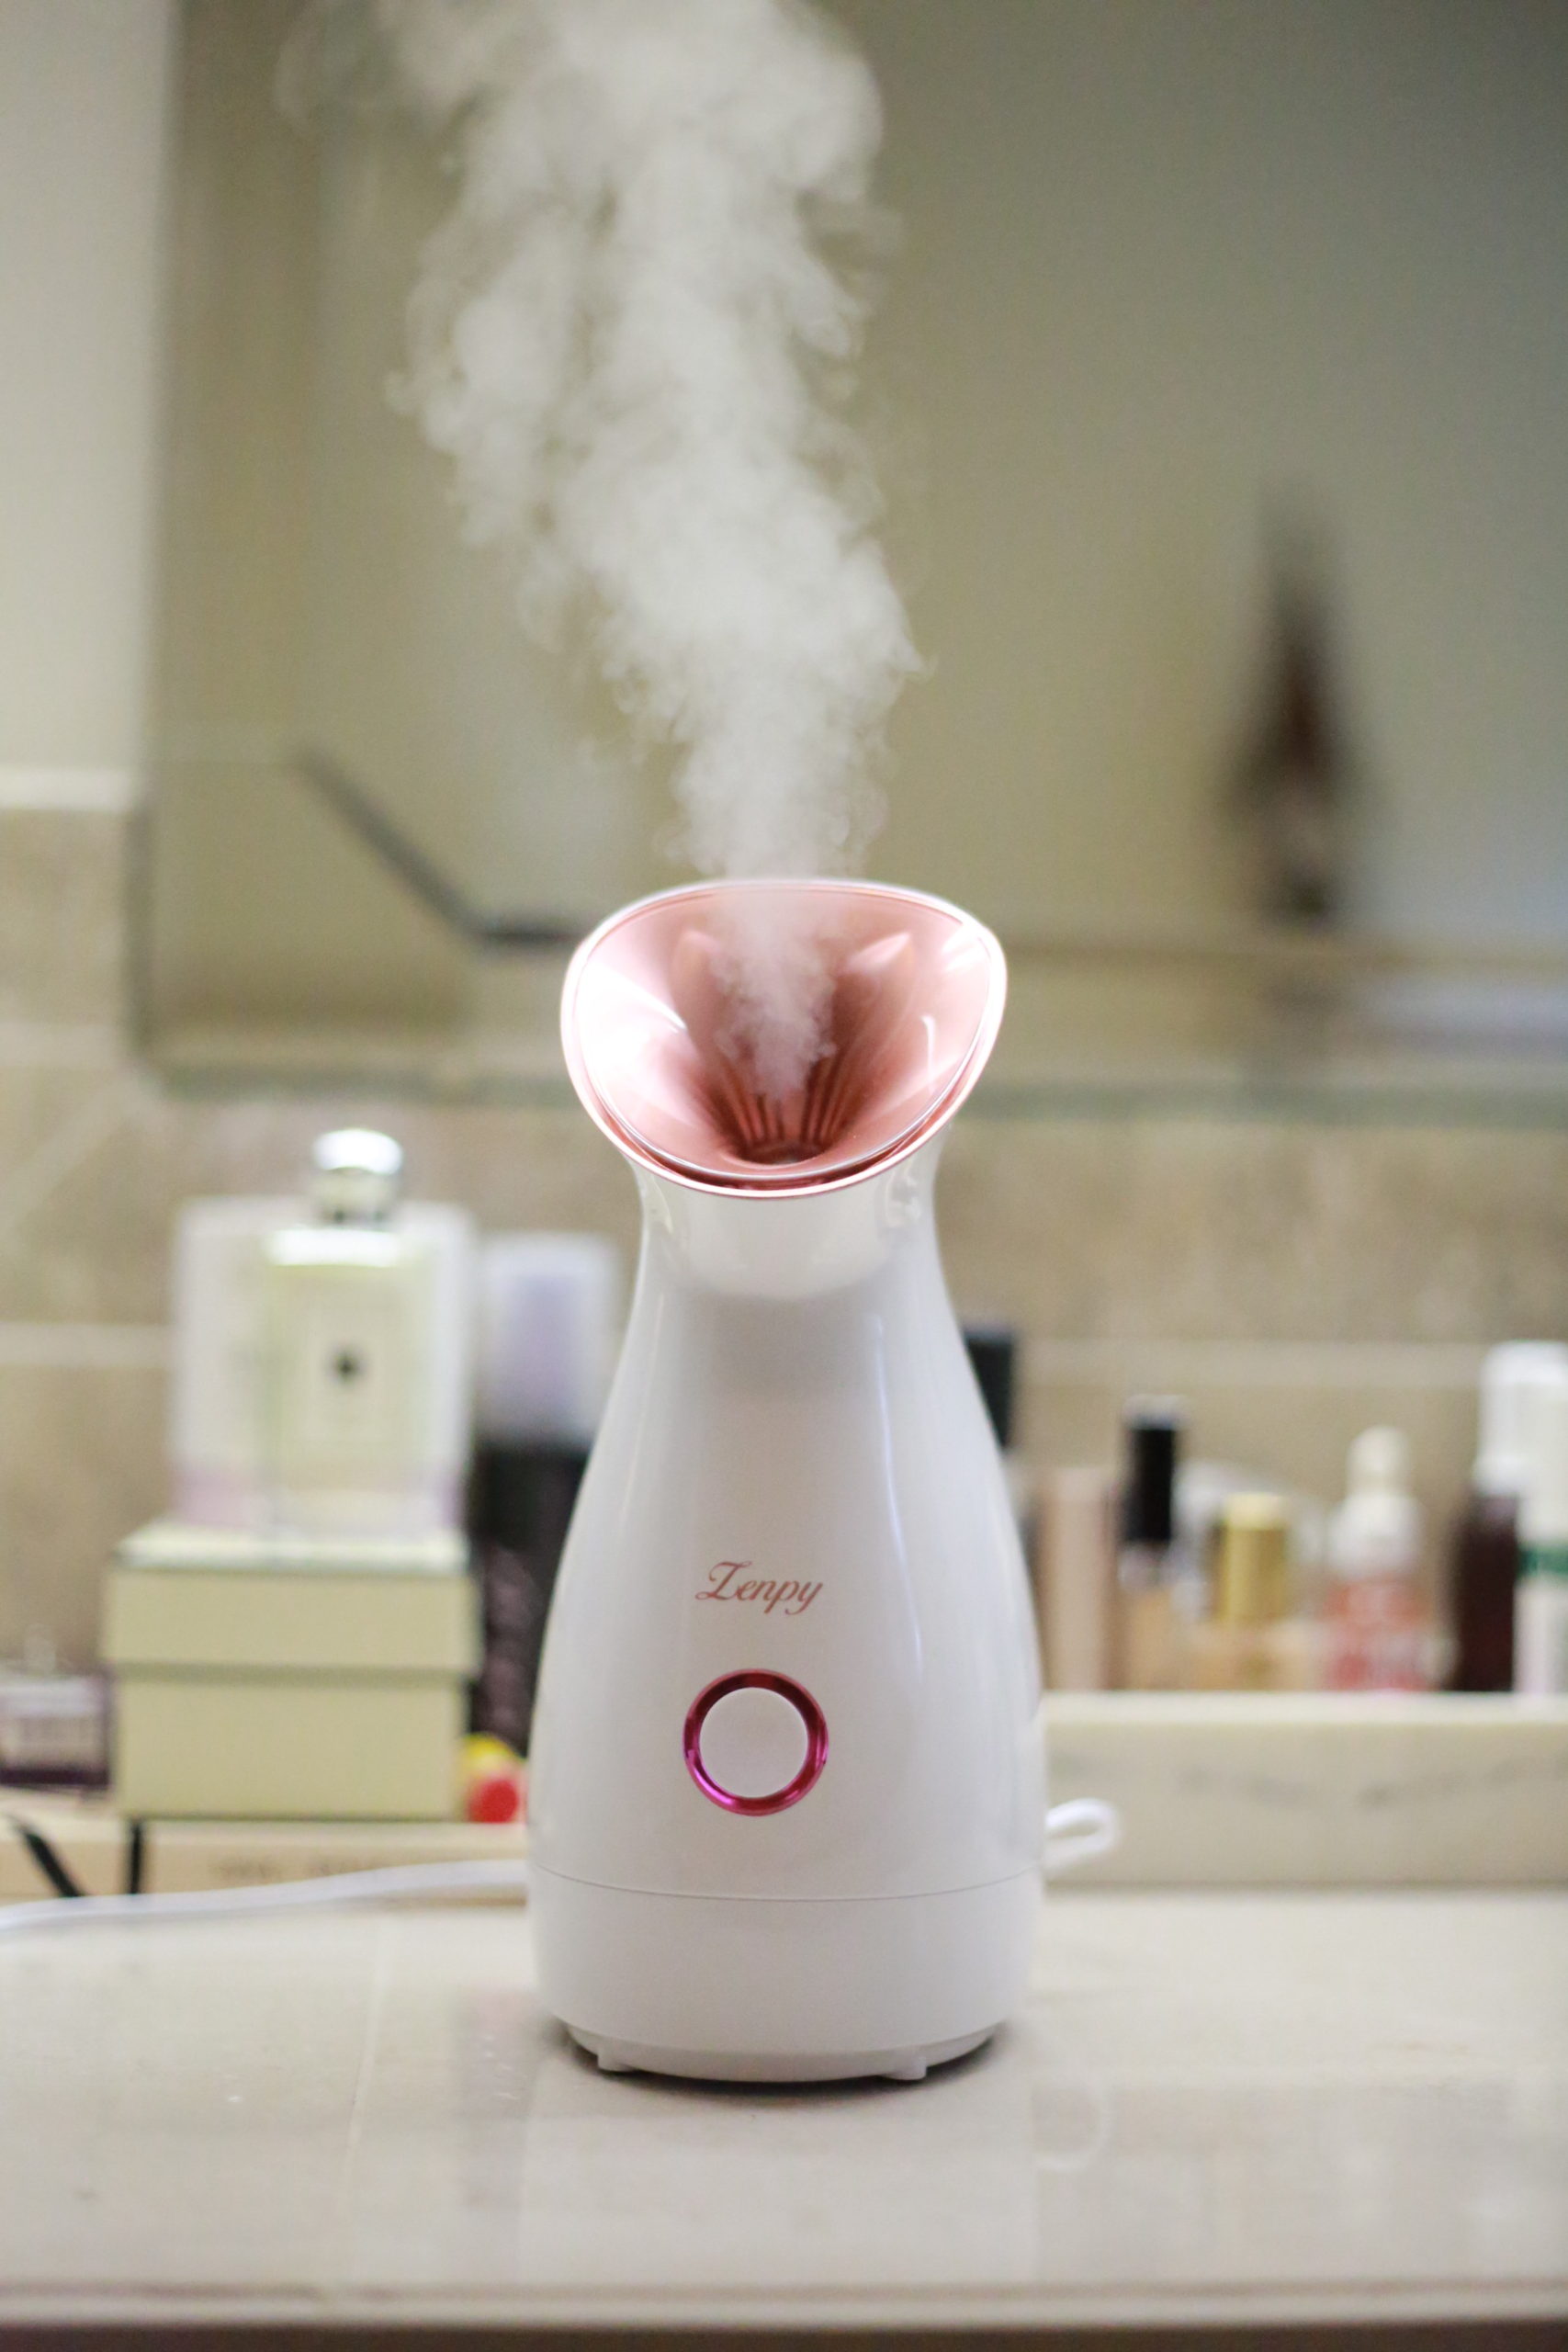 How & Why to Use a Facial Steamer